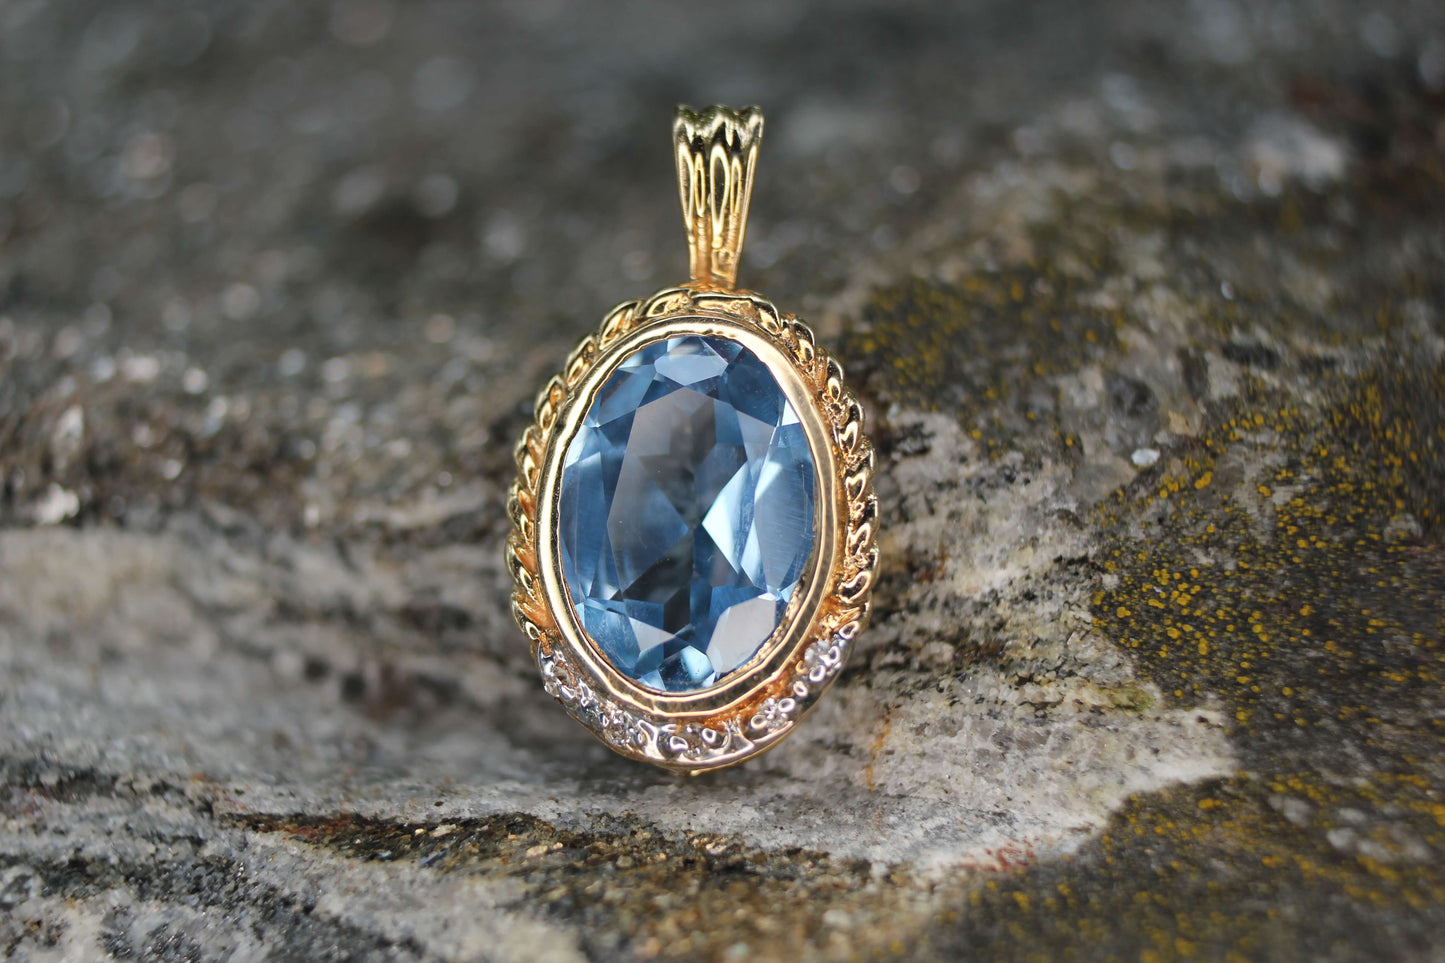 Spinel Pendant set in 10k Gold with Diamonds